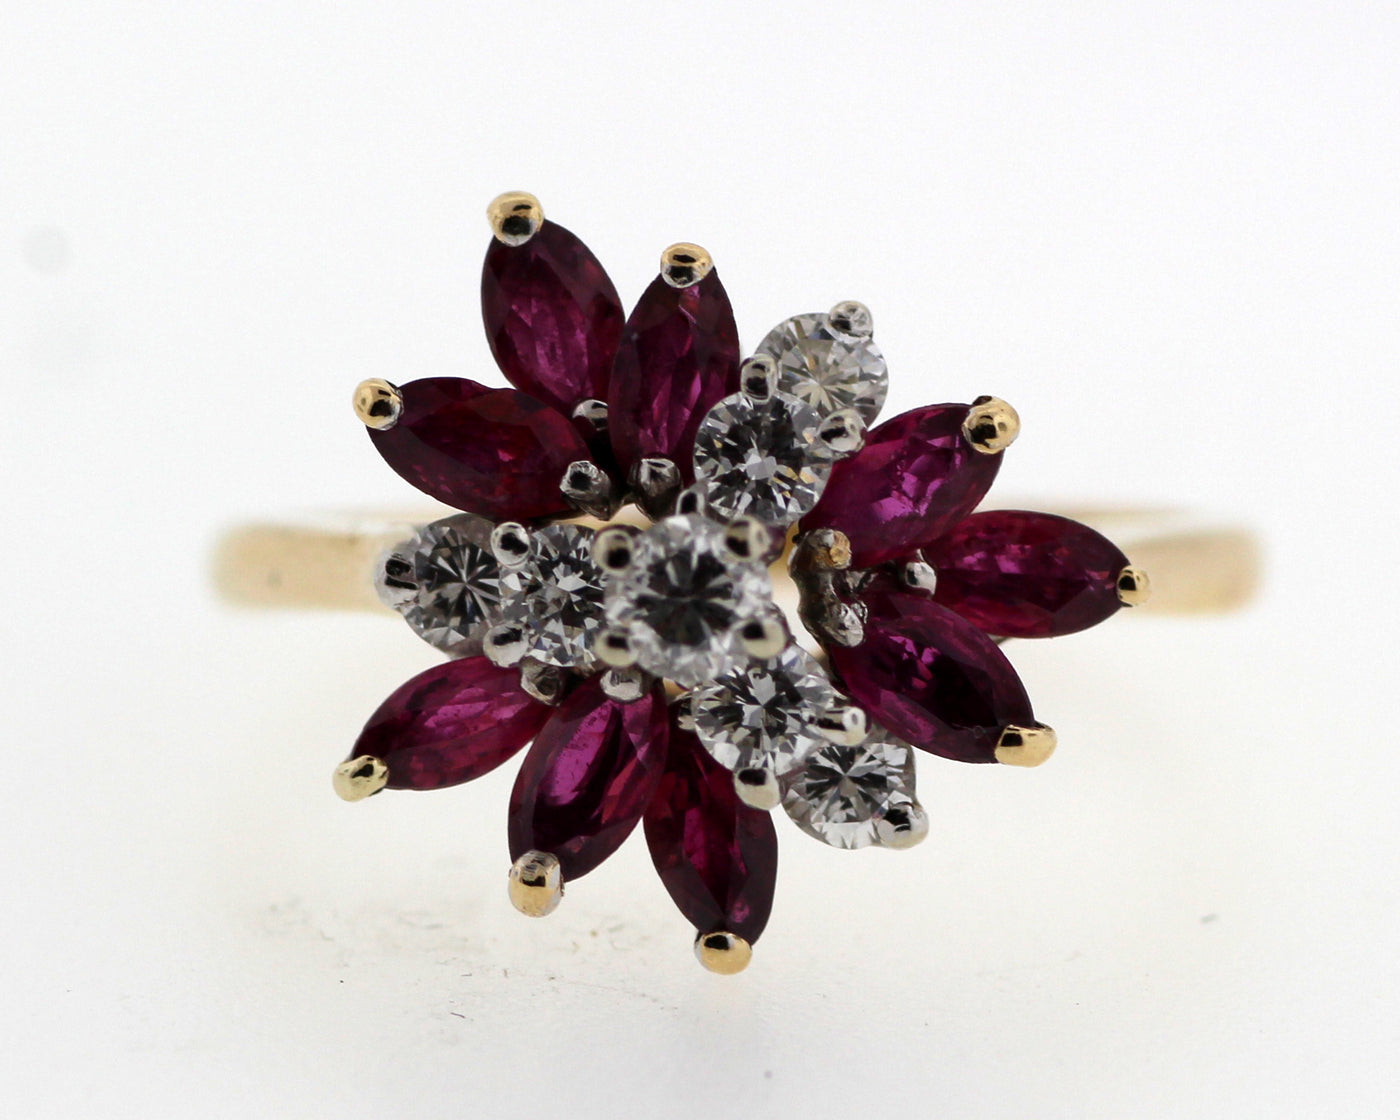 ESTATE 14KY 1.35CTTW RUBY AND DIAMOND RING .38CTTW